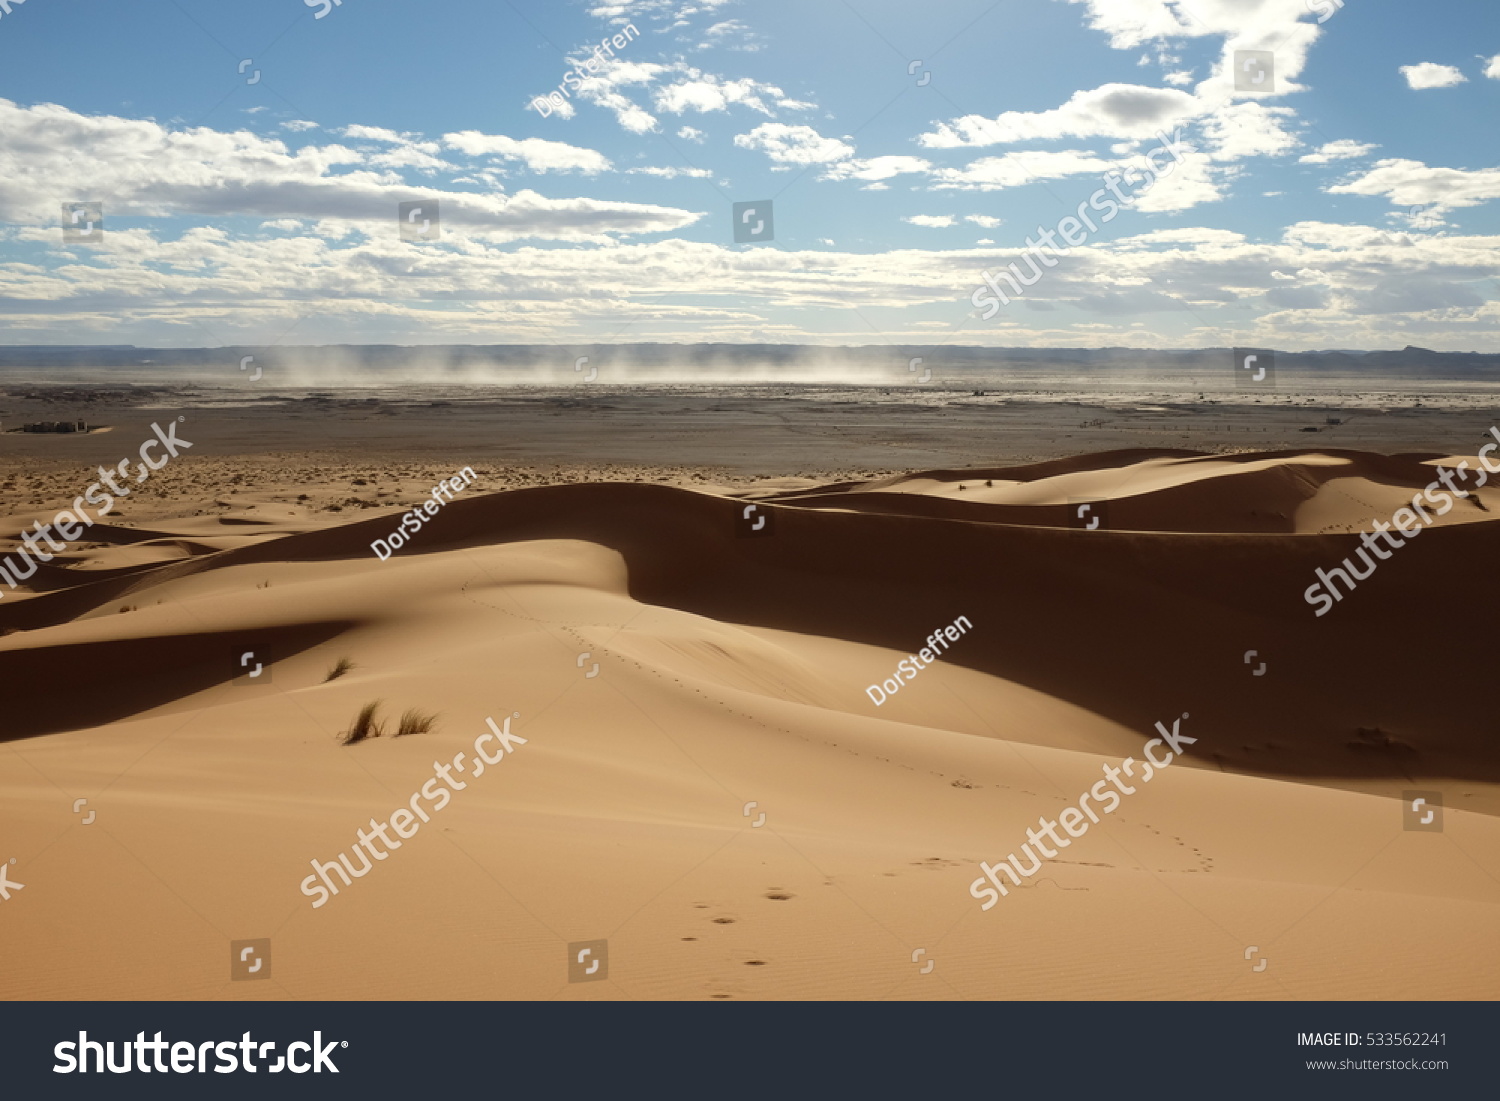 Dune Landscape of Sahara Desert with Dust Storm in the Distance
 #533562241